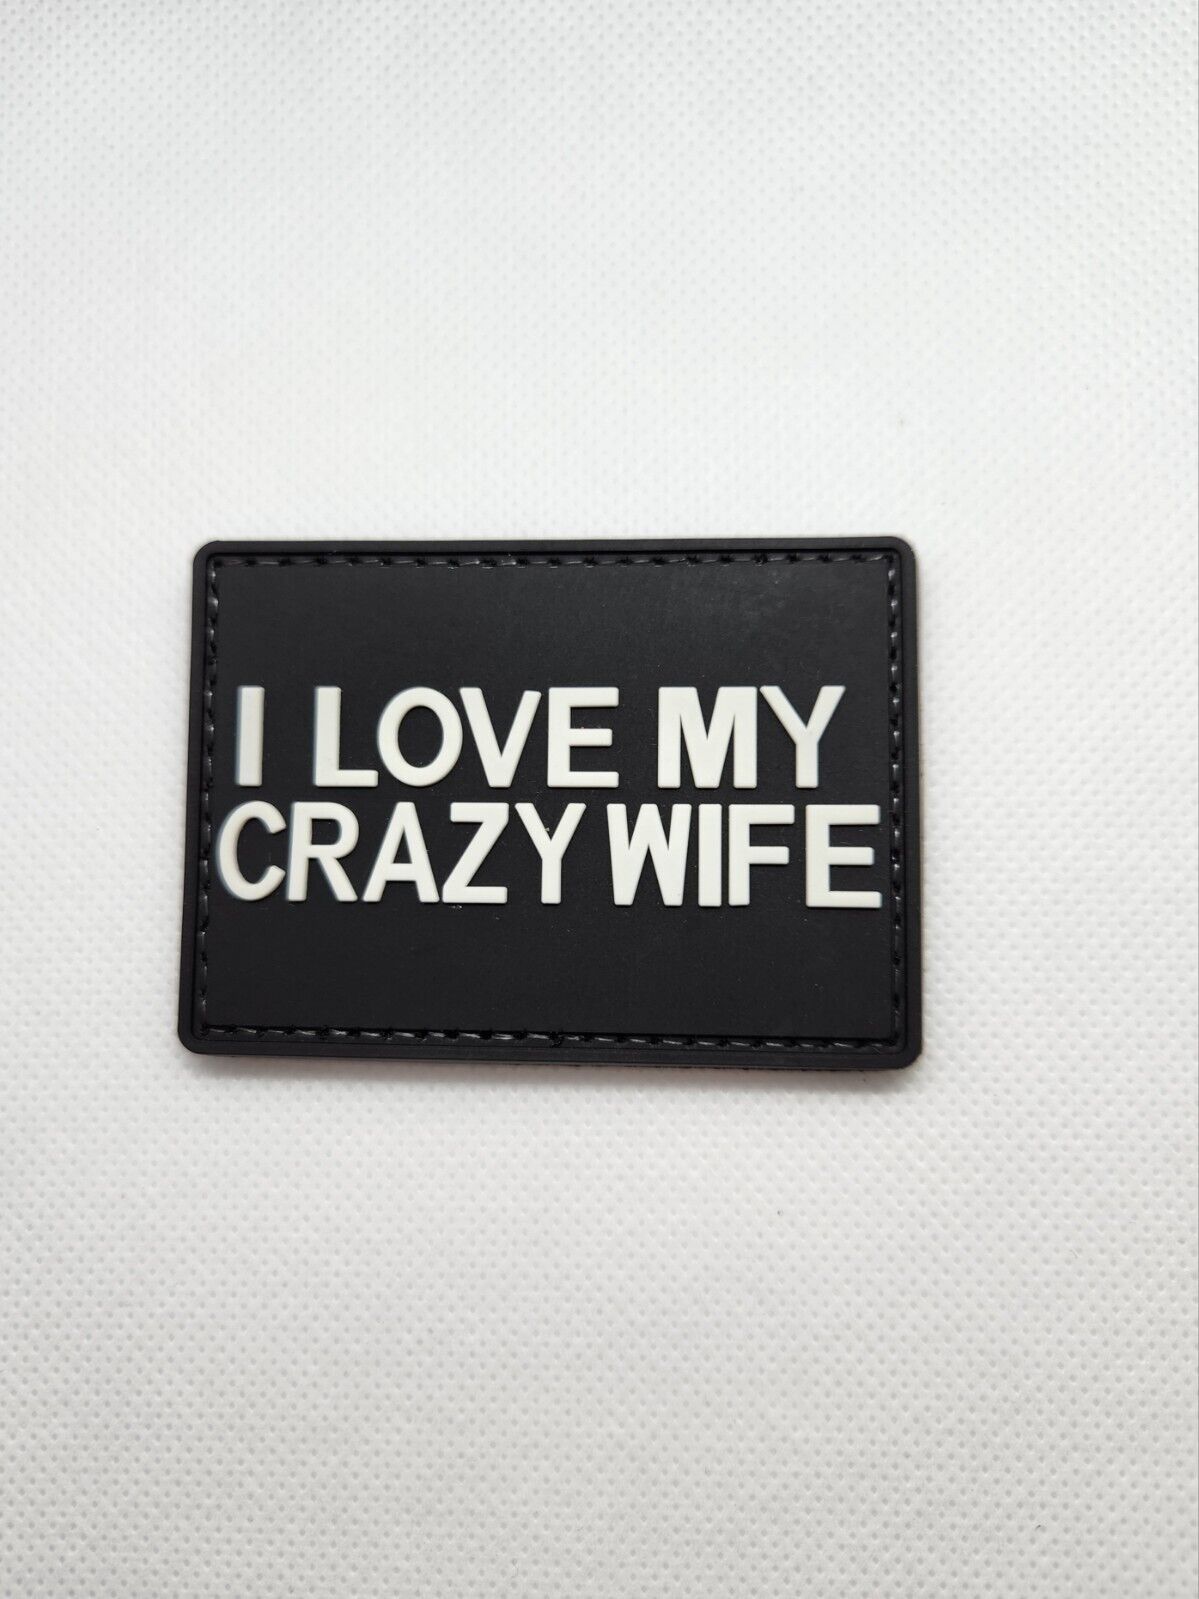 I Love My Crazy Wife 3D PVC Tactical Morale Patch – Hook Backed